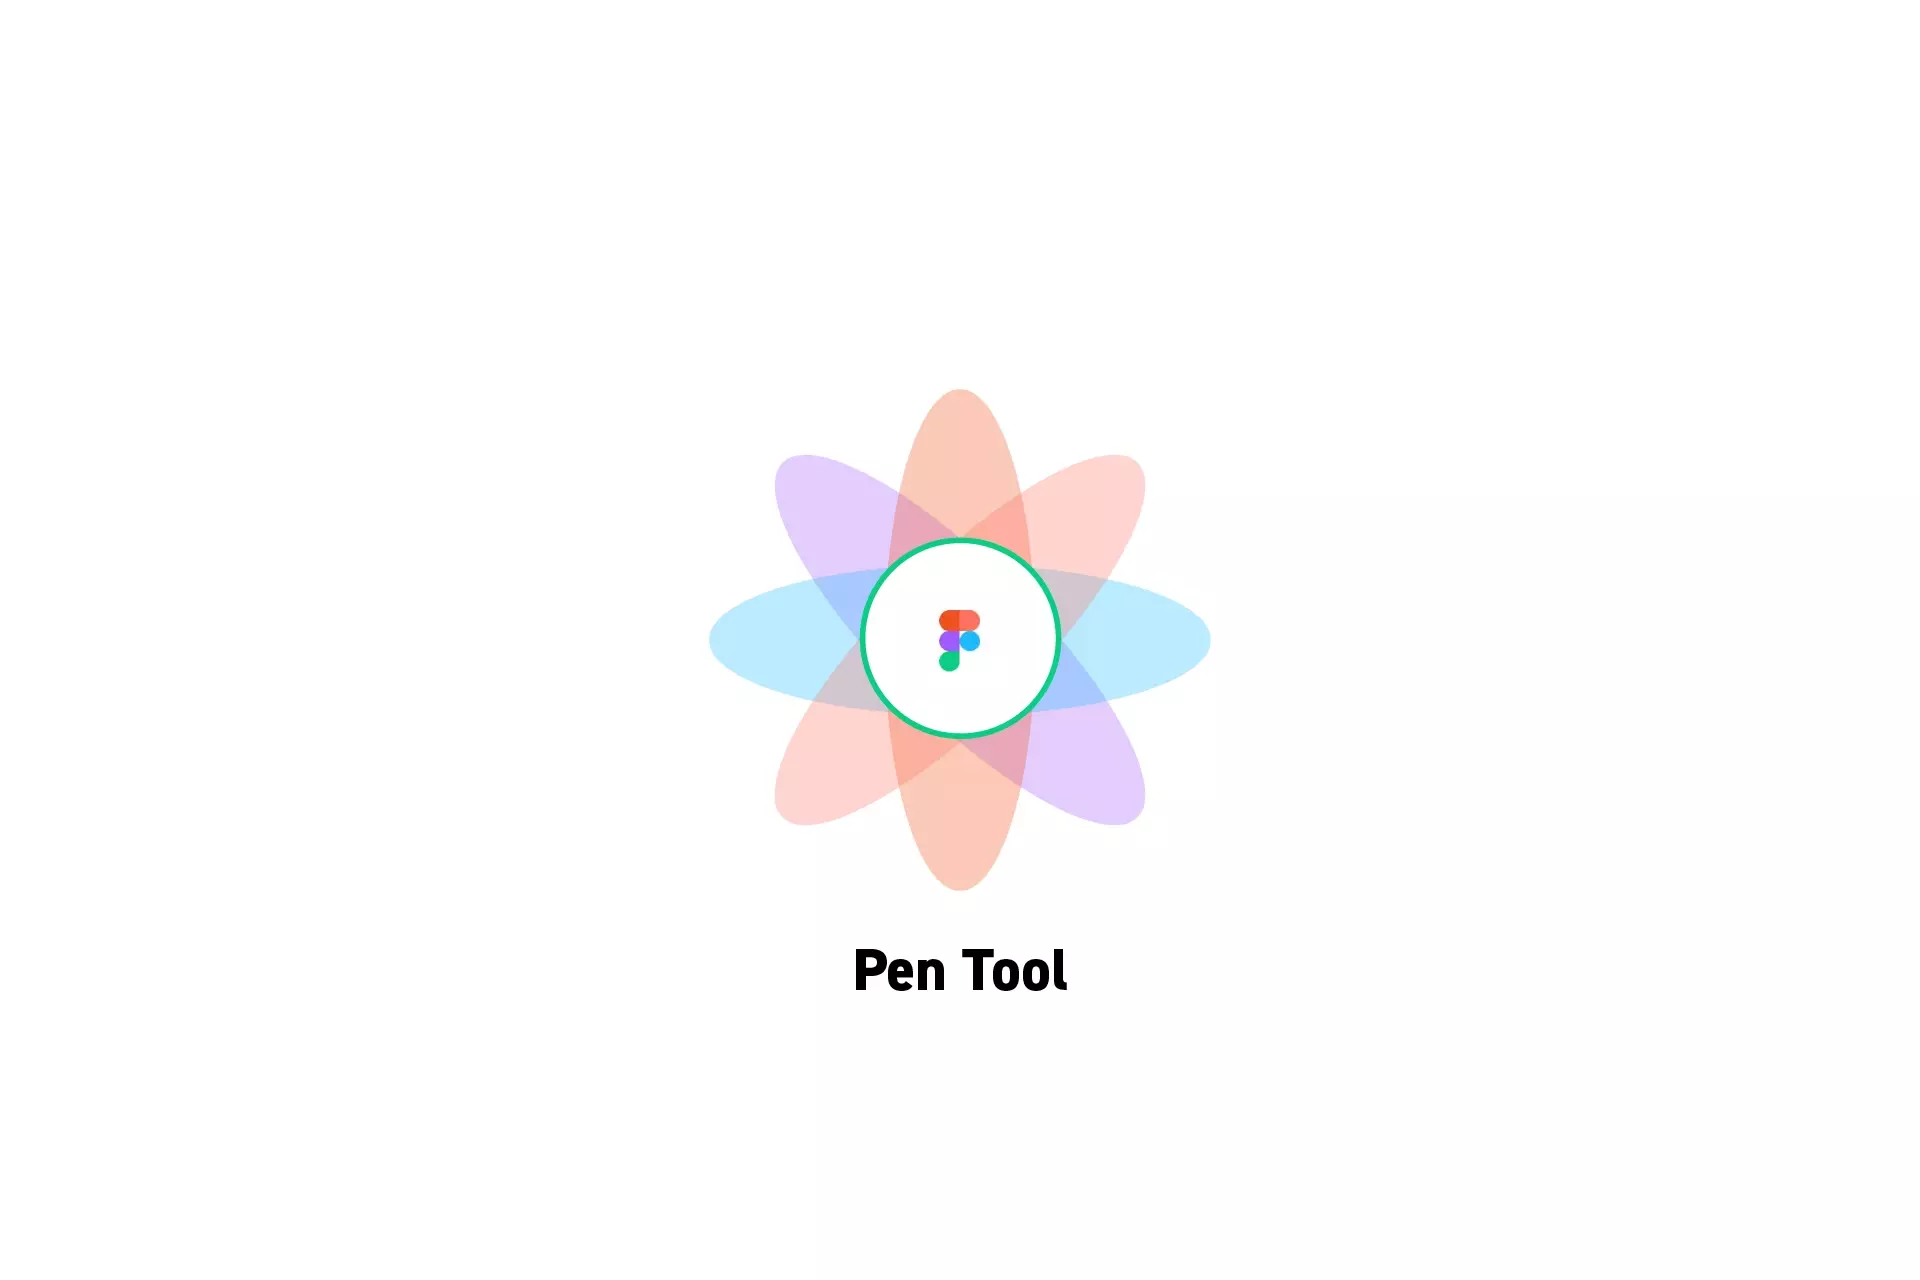 A flower that represents Figma with the text “Pen Tool” beneath it.